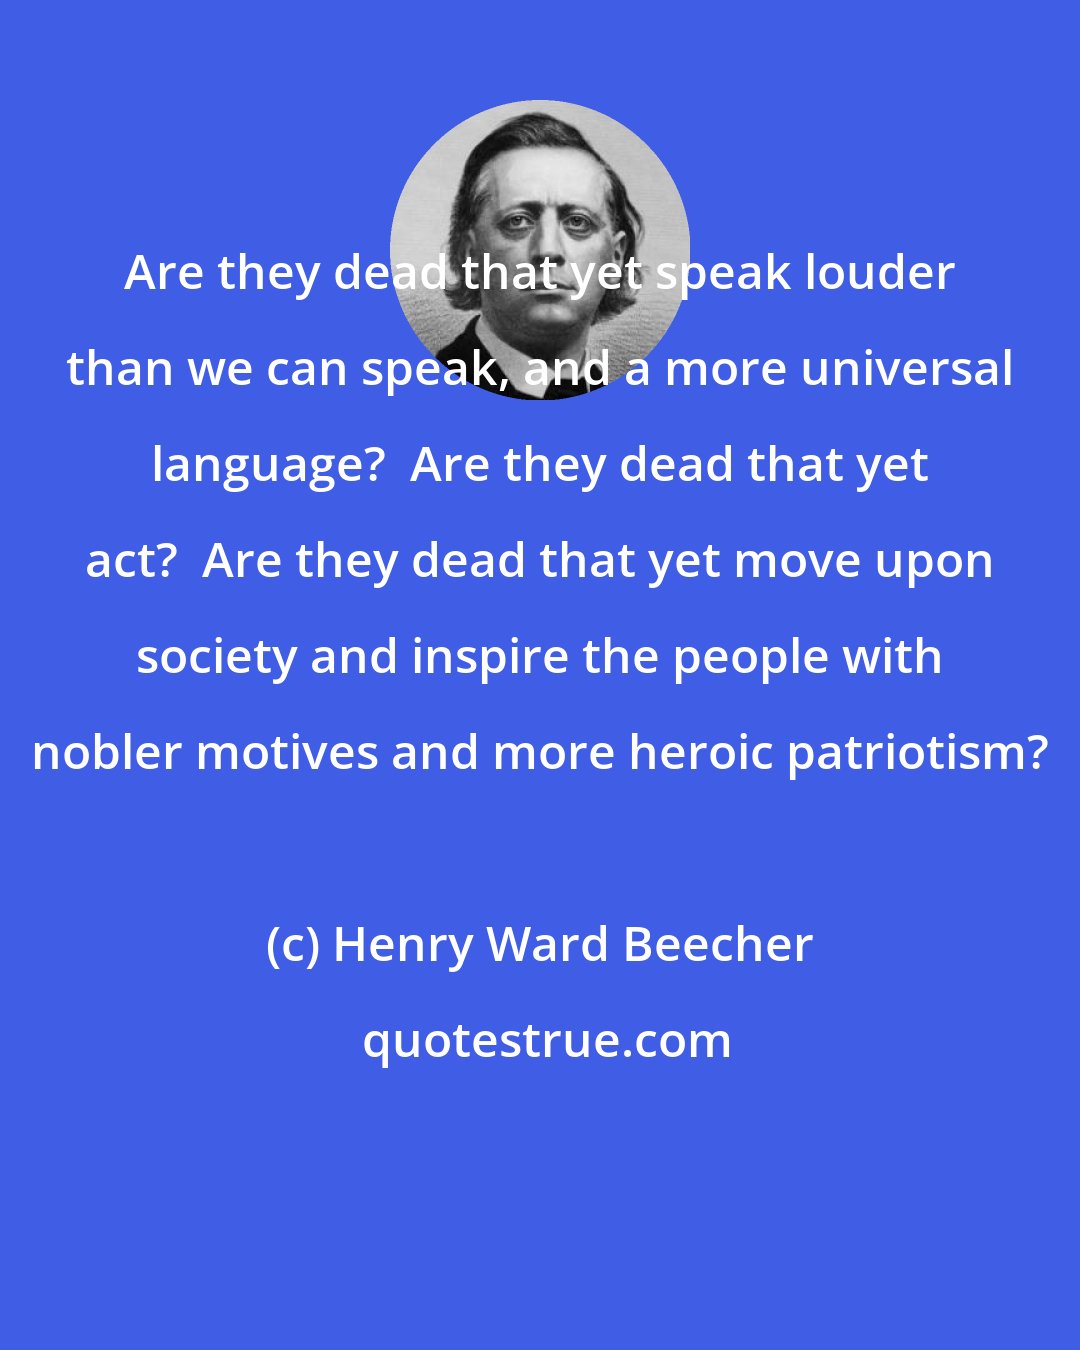 Henry Ward Beecher: Are they dead that yet speak louder than we can speak, and a more universal language?  Are they dead that yet act?  Are they dead that yet move upon society and inspire the people with nobler motives and more heroic patriotism?